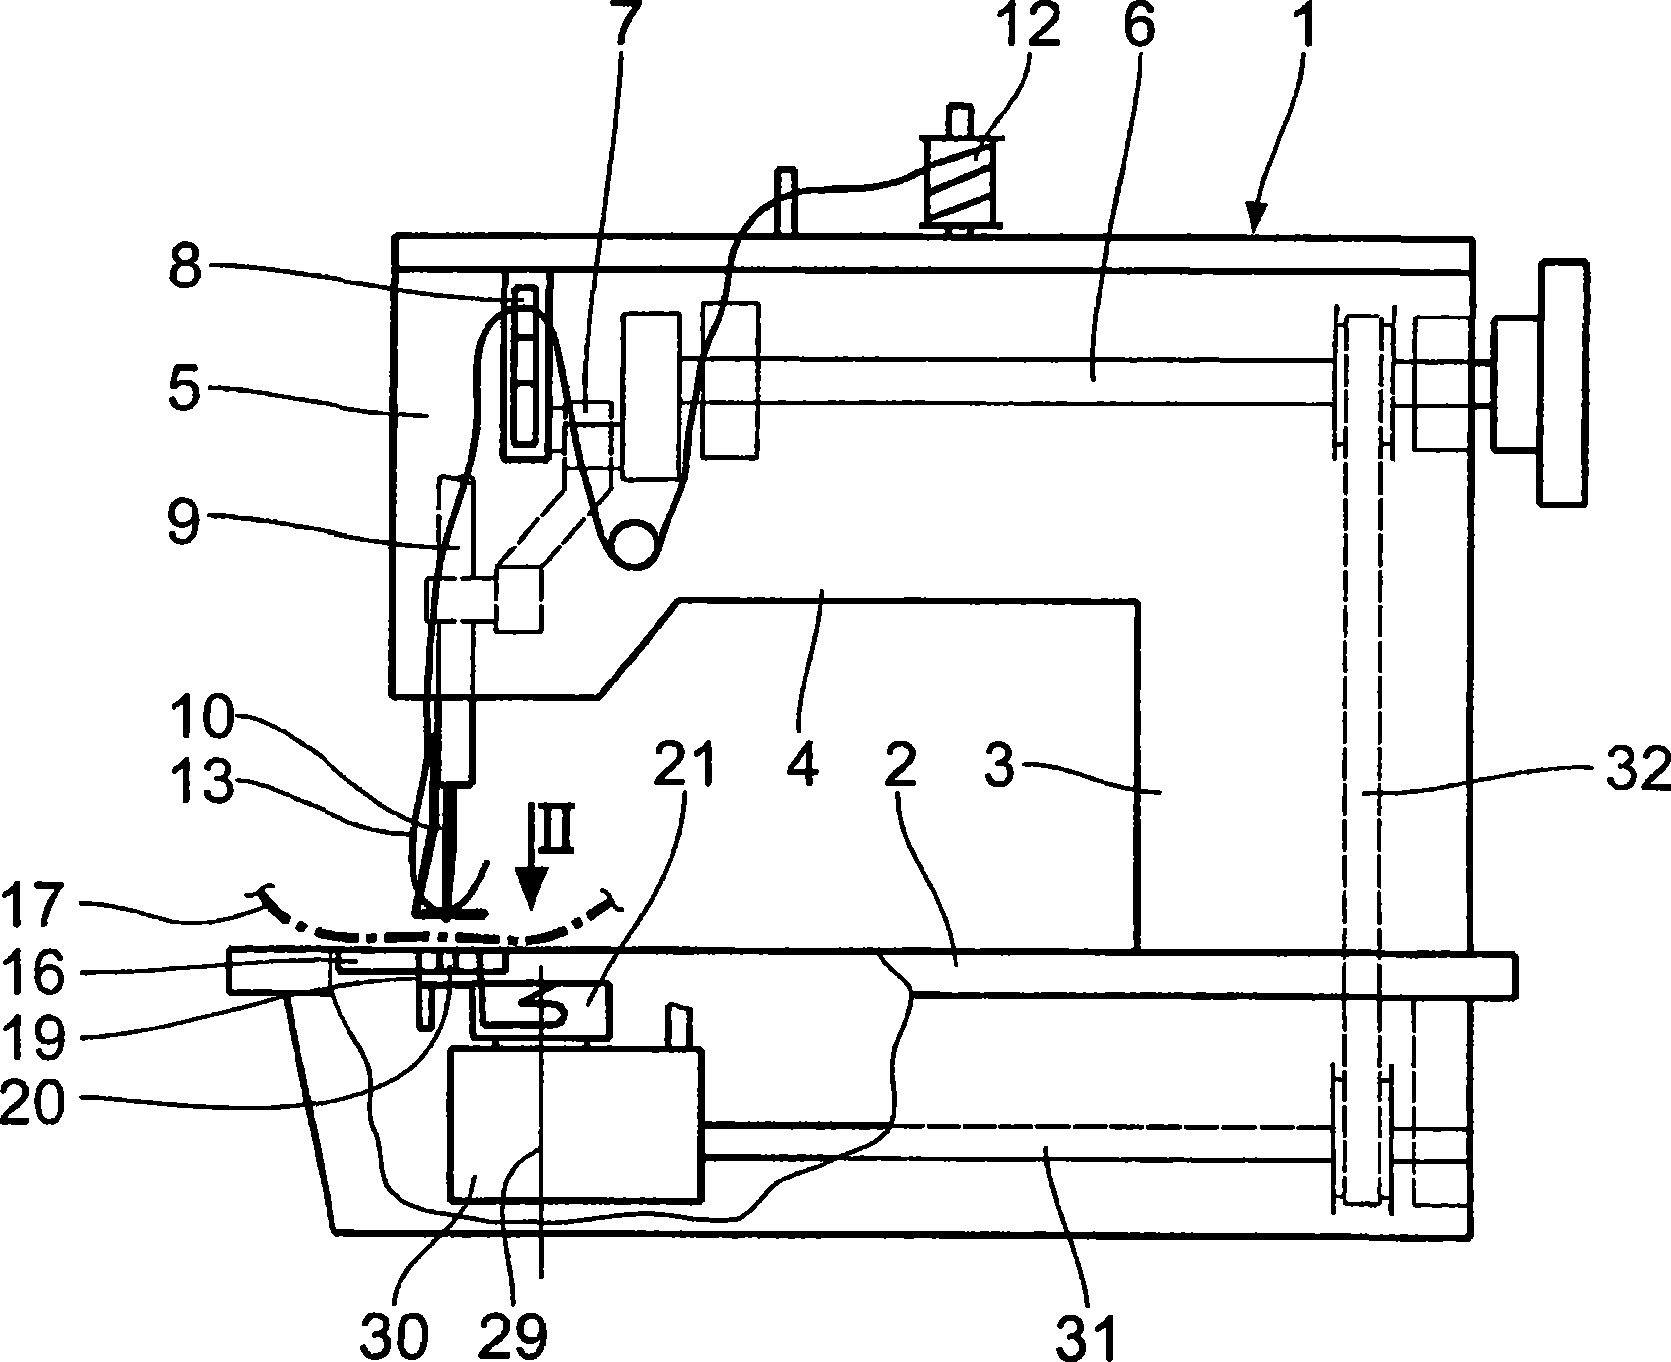 Thread winding housing for inserting into a housing receptacle of a gripper body, rotatable about a vertical axis, of a sewing machine